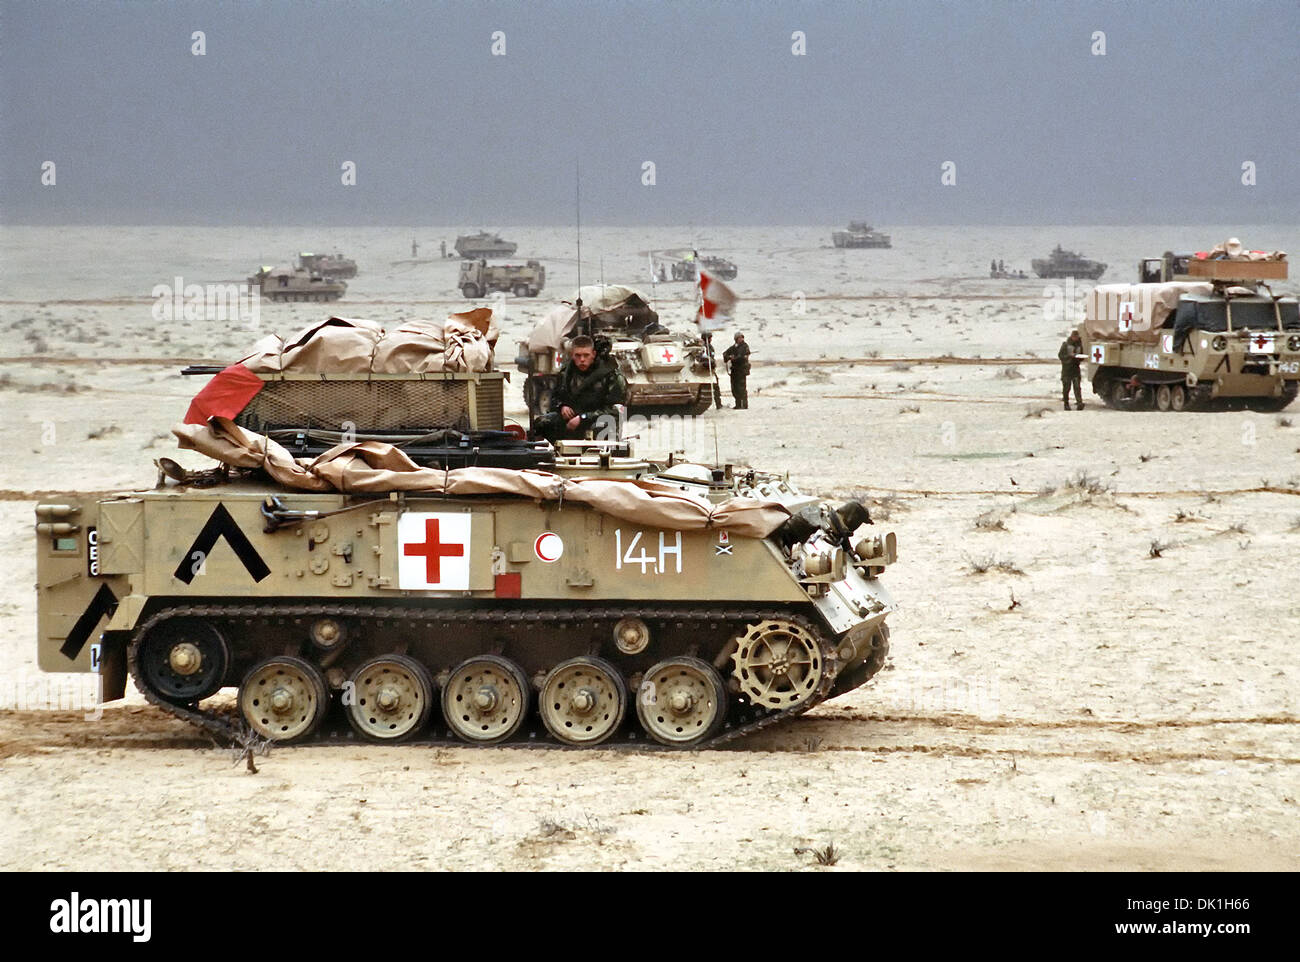 British Army Medical Vehicles of the 7th Brigade Royal Scots, 1st United Kingdom Armored Division, positioned north of the Saudi-Iraq border during Operation Desert Storm February 28, 1991 in Iraq. In the foreground is a British FV-432 armored personnel carrier. Stock Photo